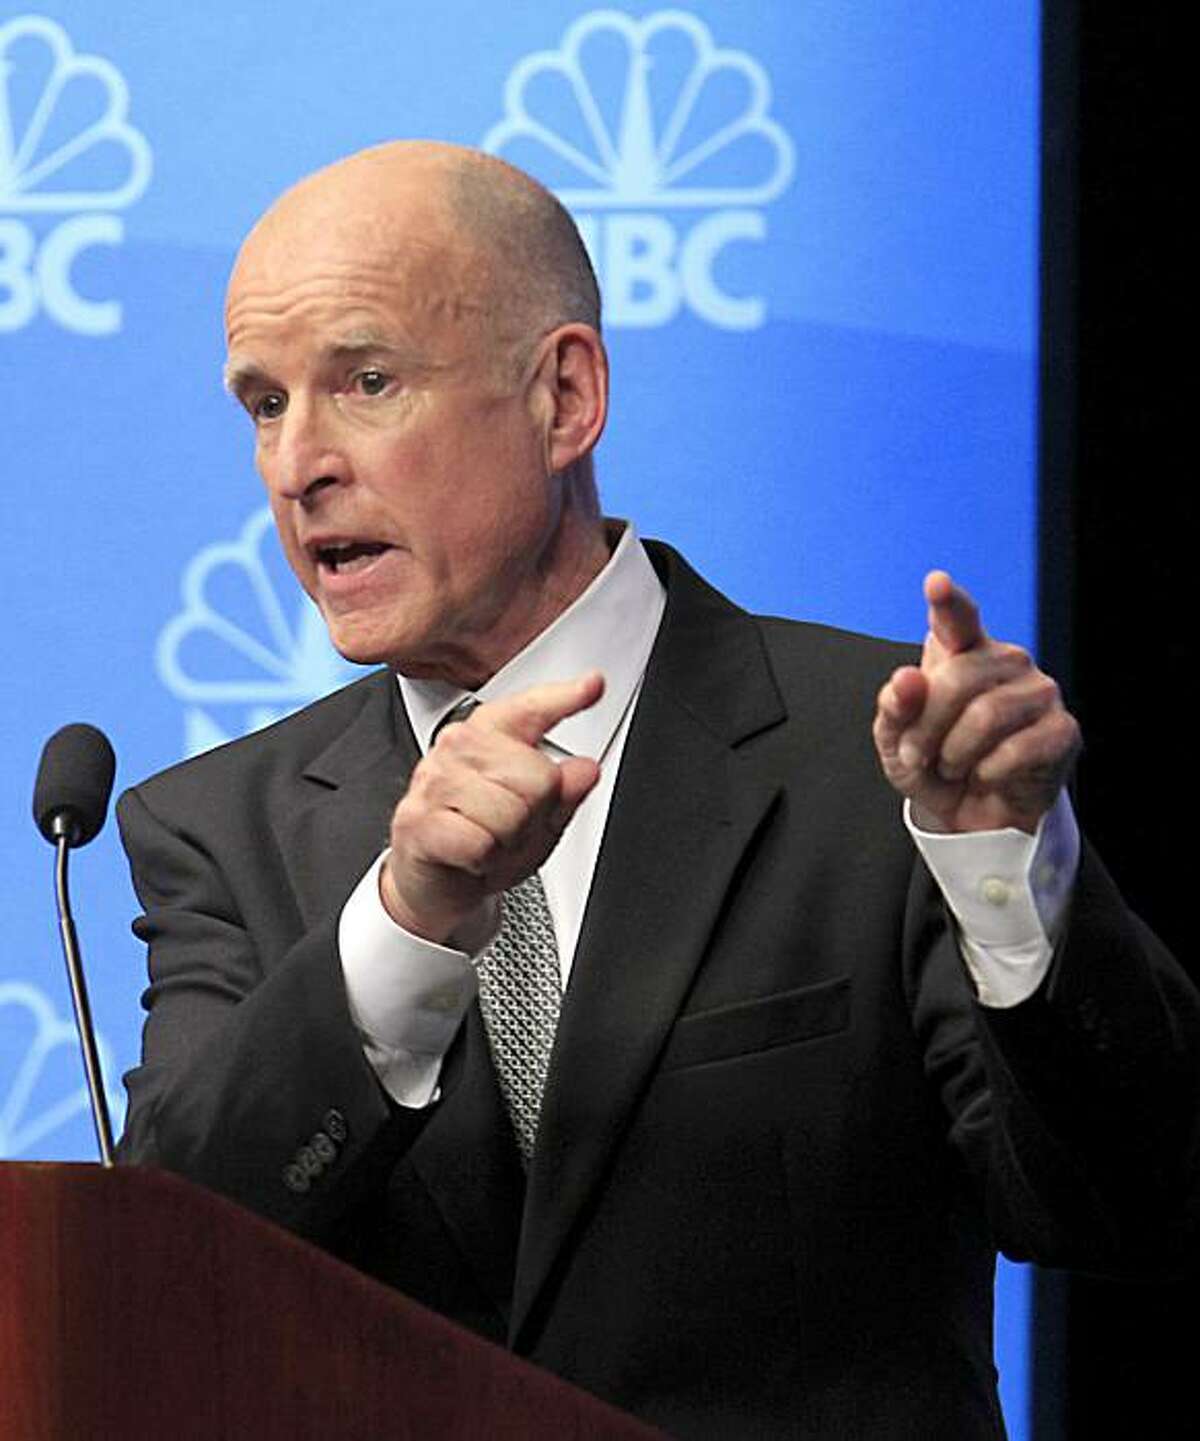 FILE - In this Oct. 12, 2010 file photo, Californian Democratic gubernatorial candidate Jerry Brown gestures during his debate with Republican gubernatorial candidate Meg Whitman, at Dominican University in San Rafael, Calif. The Nov. 2 general electionwill be the first since the 1990s without a measure to ban gay marriage on any state ballot, yet the divisive issue is surfacing in many races across the country. Brown supports same-sex marriage and has refused to defend the ban in court.